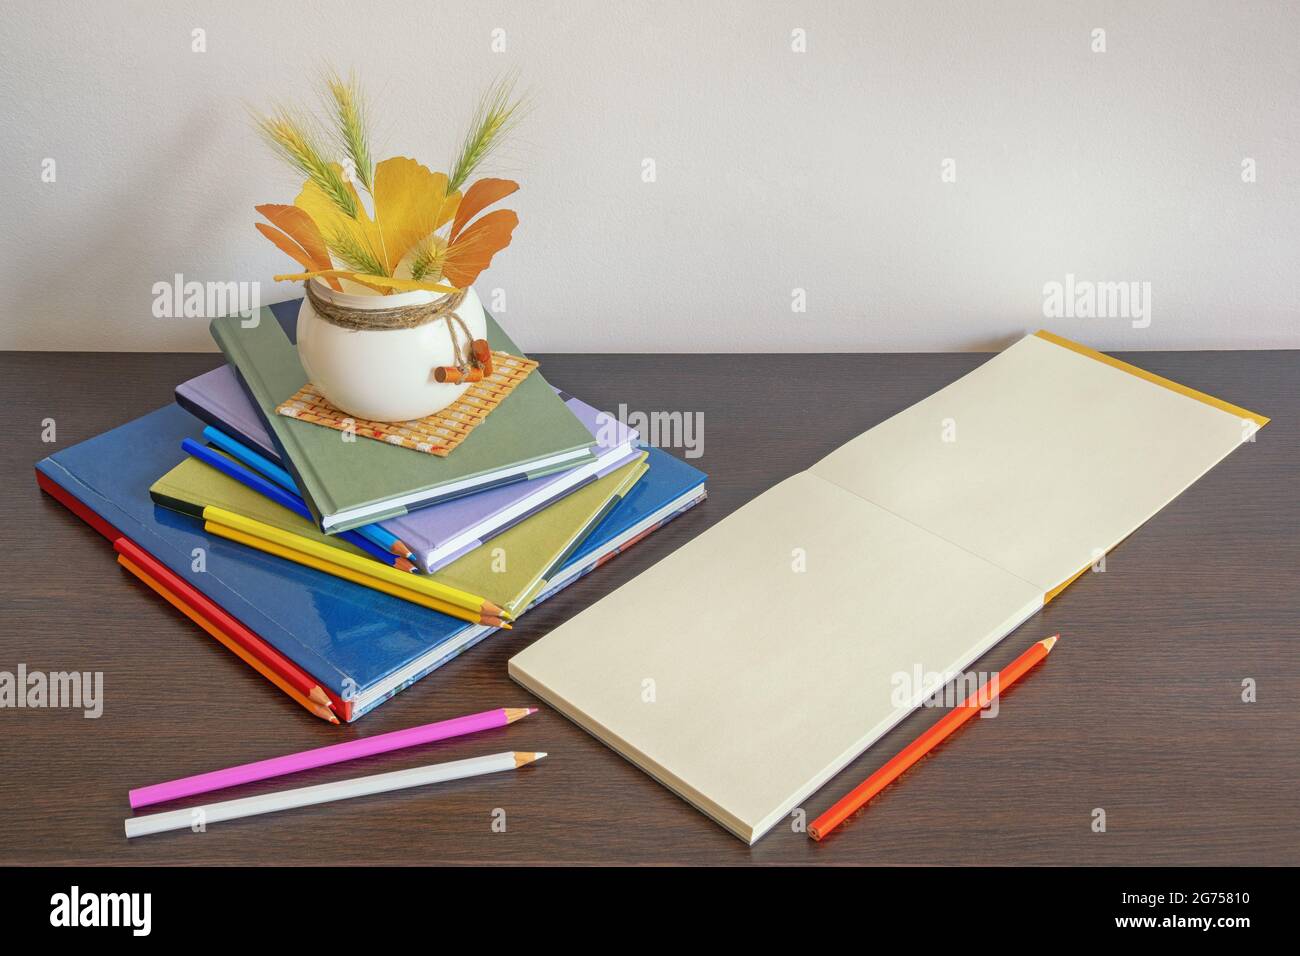 School concept. Stack of books, colorful colored pencils and open sketchbook on dark background. Autumn leaves. Free space for text or picture Stock Photo